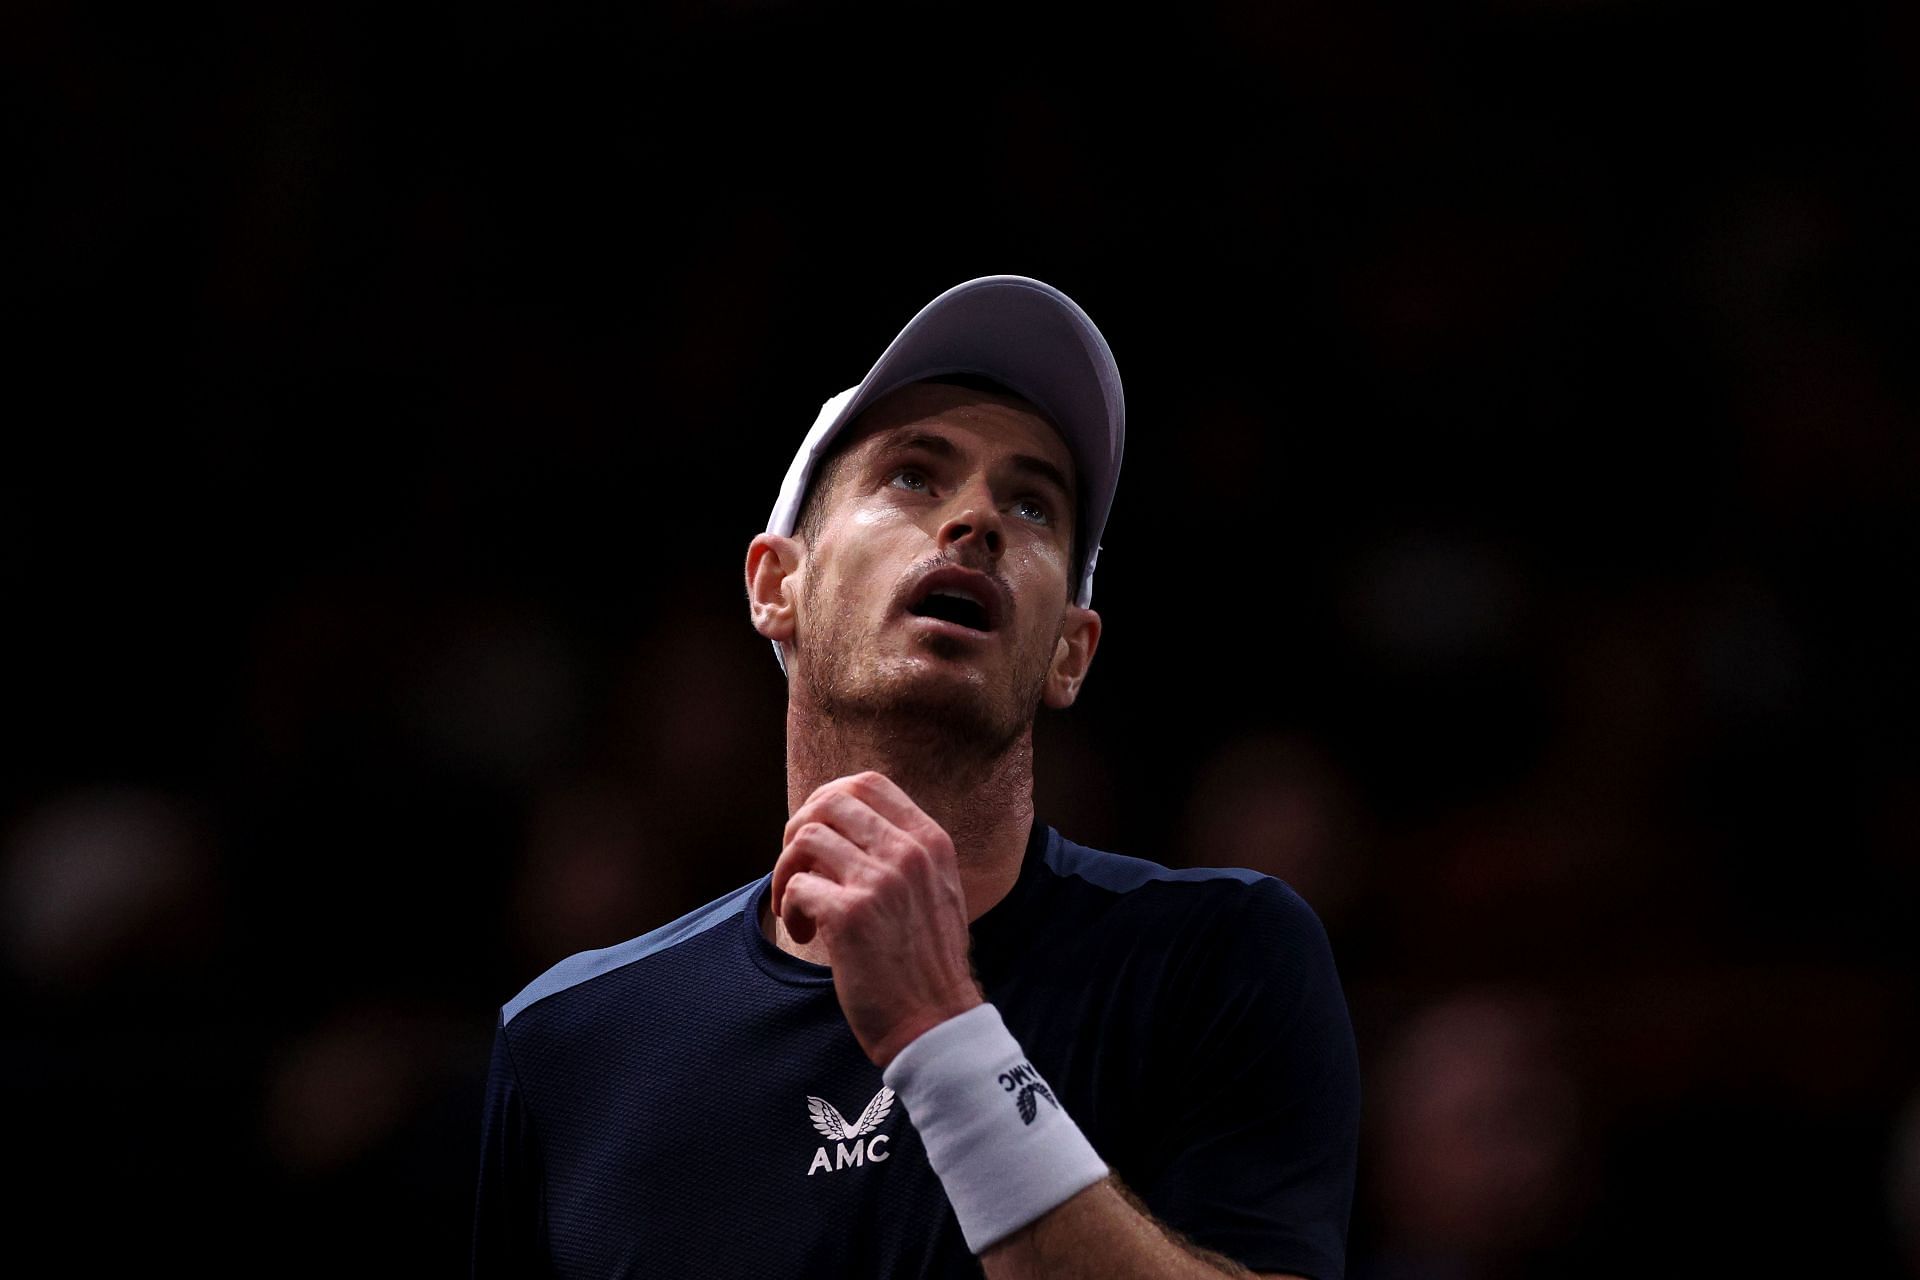 “Time to cry deeply and curse the world at how unfair it all is” - Fans distraught as Andy Murray withdraws from Wimbledon in potential final season